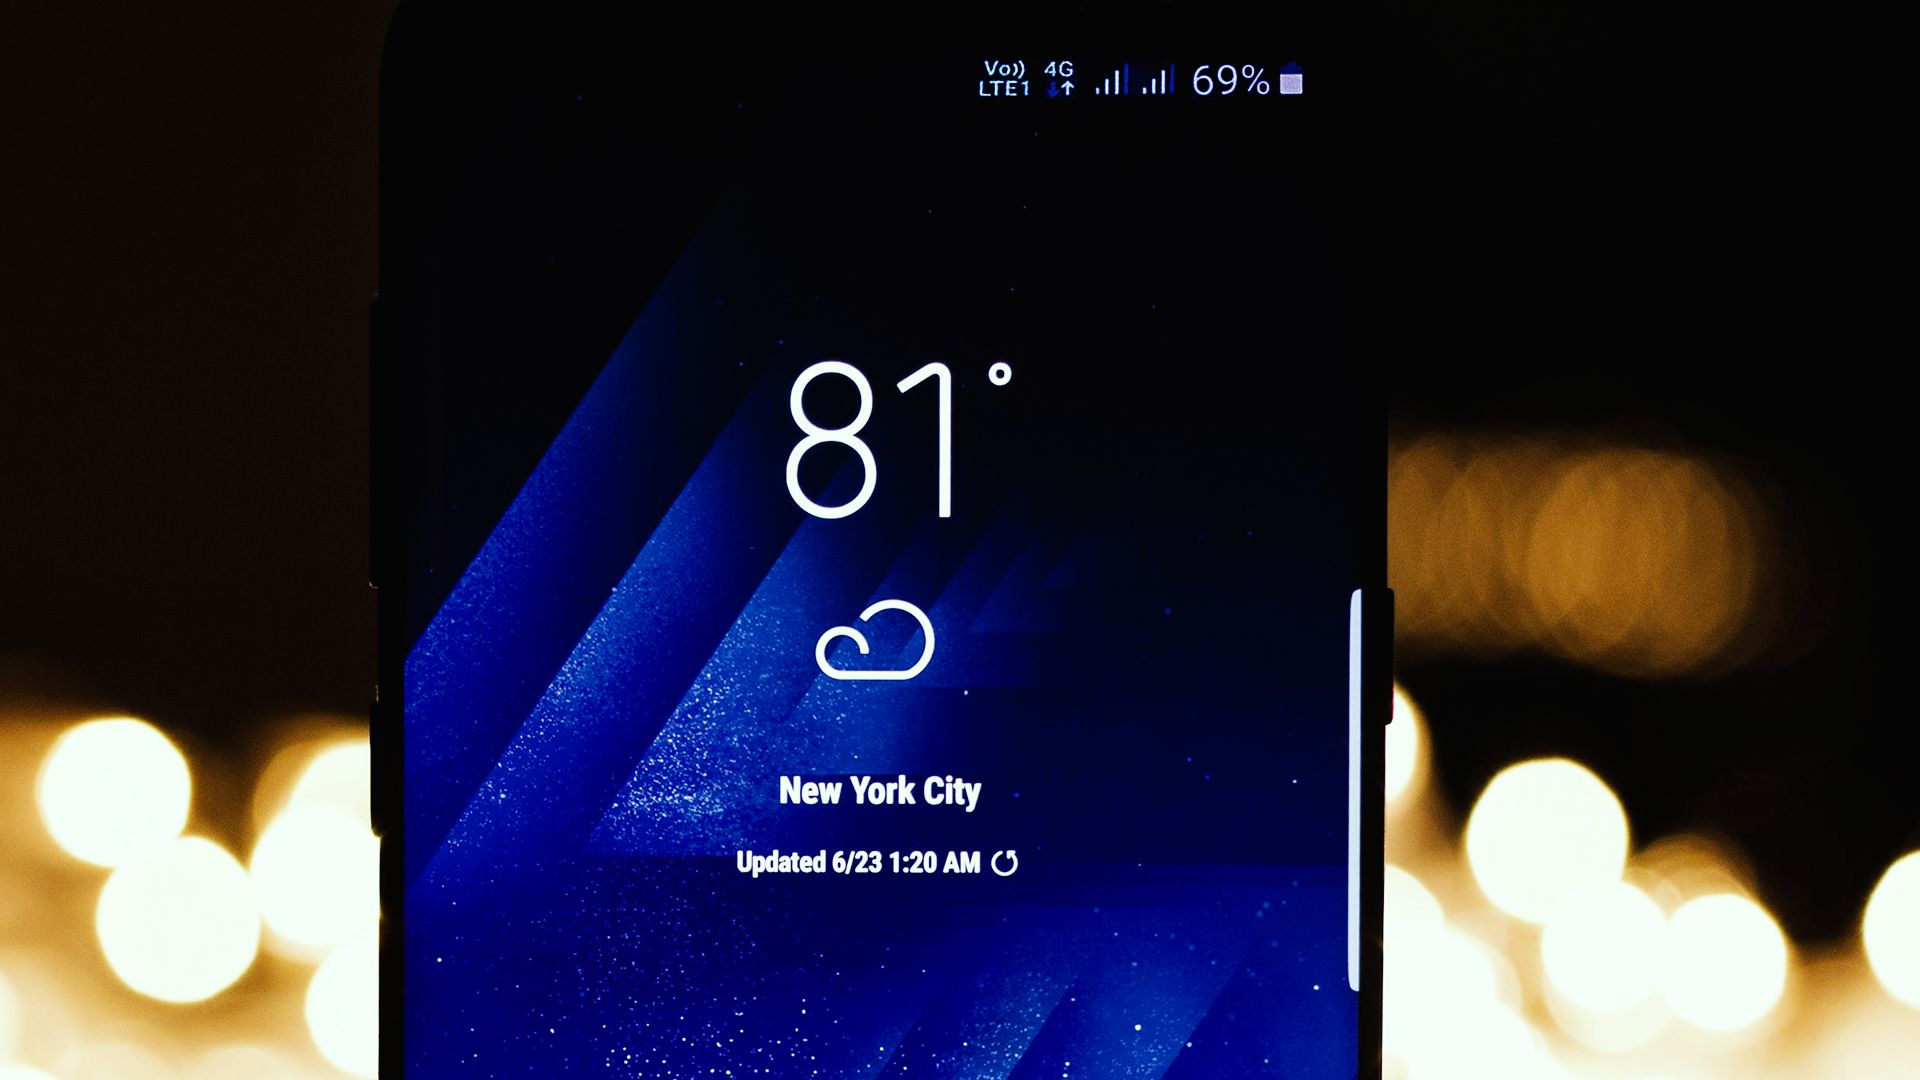 A Samsung phone screen showing voLTE enabled, location, and weather 